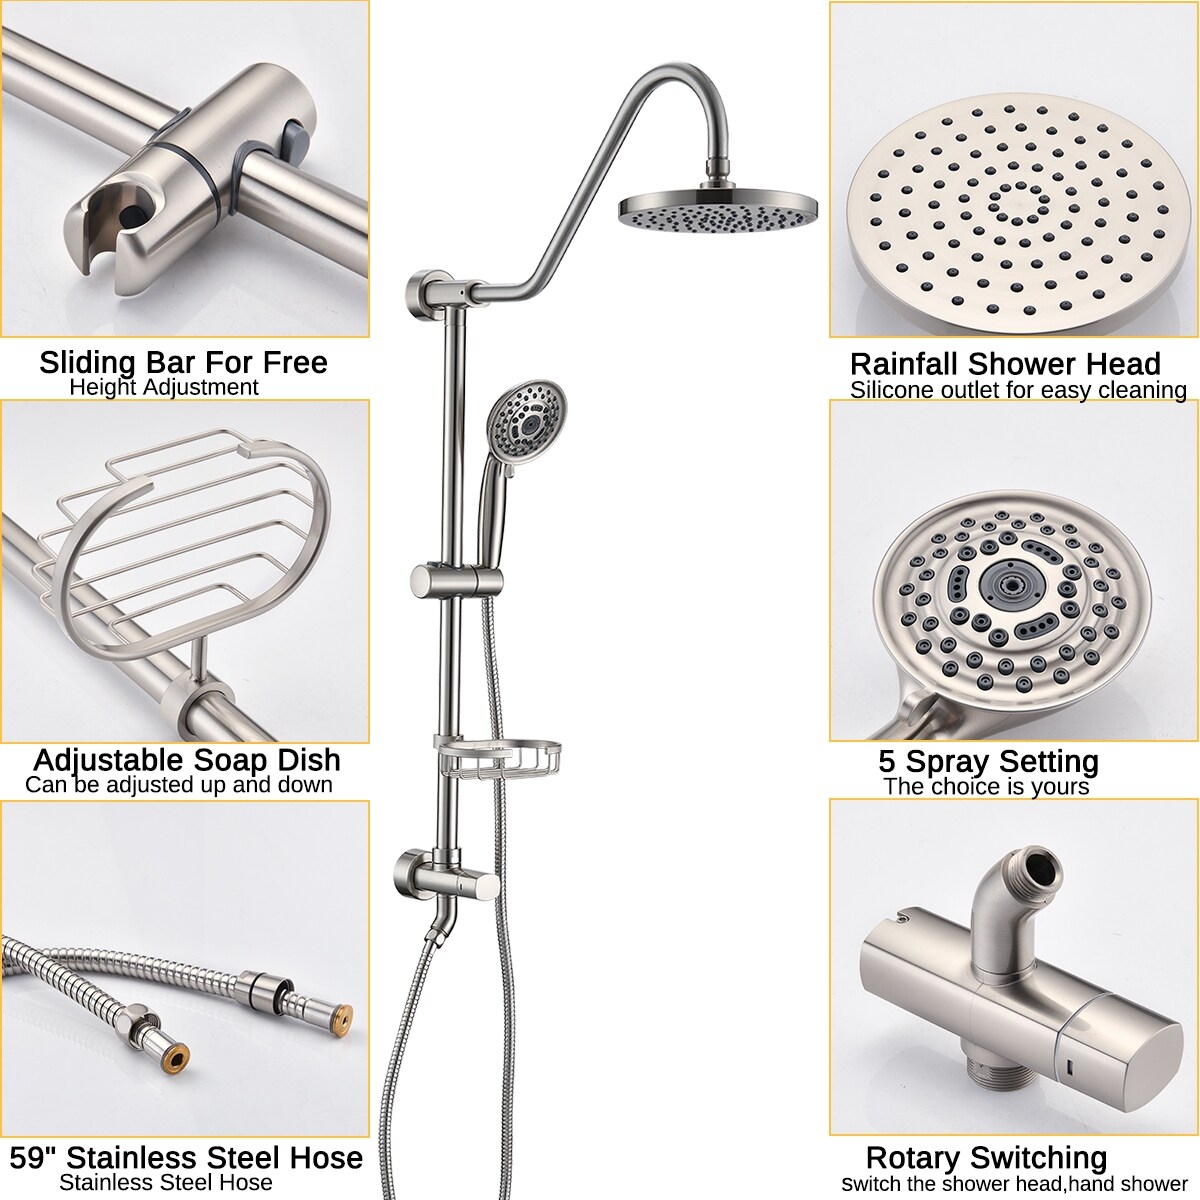 https://ak1.ostkcdn.com/images/products/is/images/direct/07c3e4495a853ea54139608015d004e30b65e411/Proox-5-sprayer-Rain-Shower-Faucet-with-Handheld-Shower-Soap-Dish.jpg